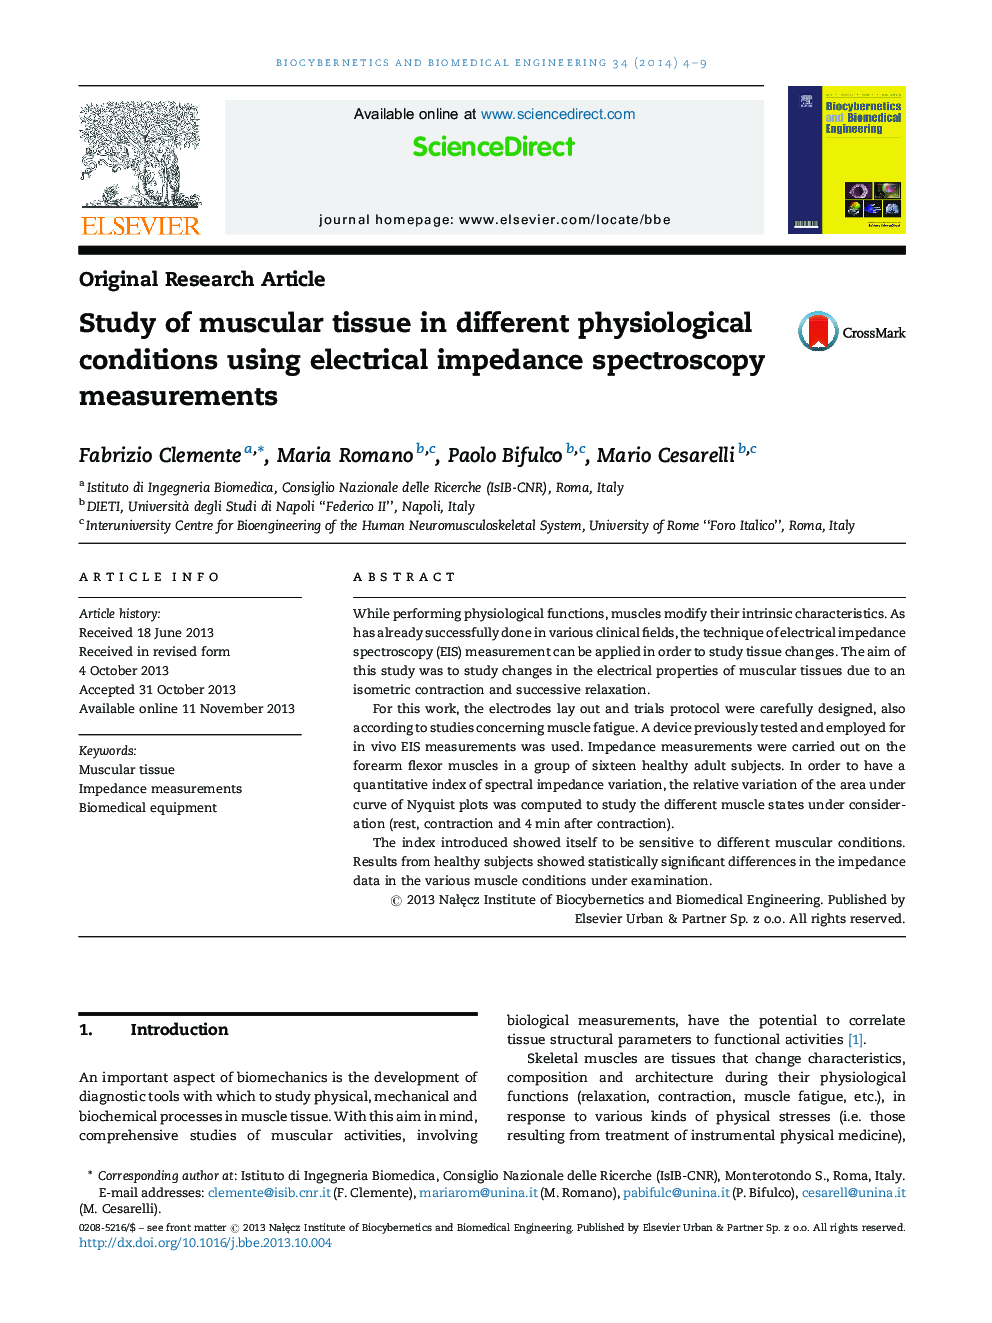 Study of muscular tissue in different physiological conditions using electrical impedance spectroscopy measurements